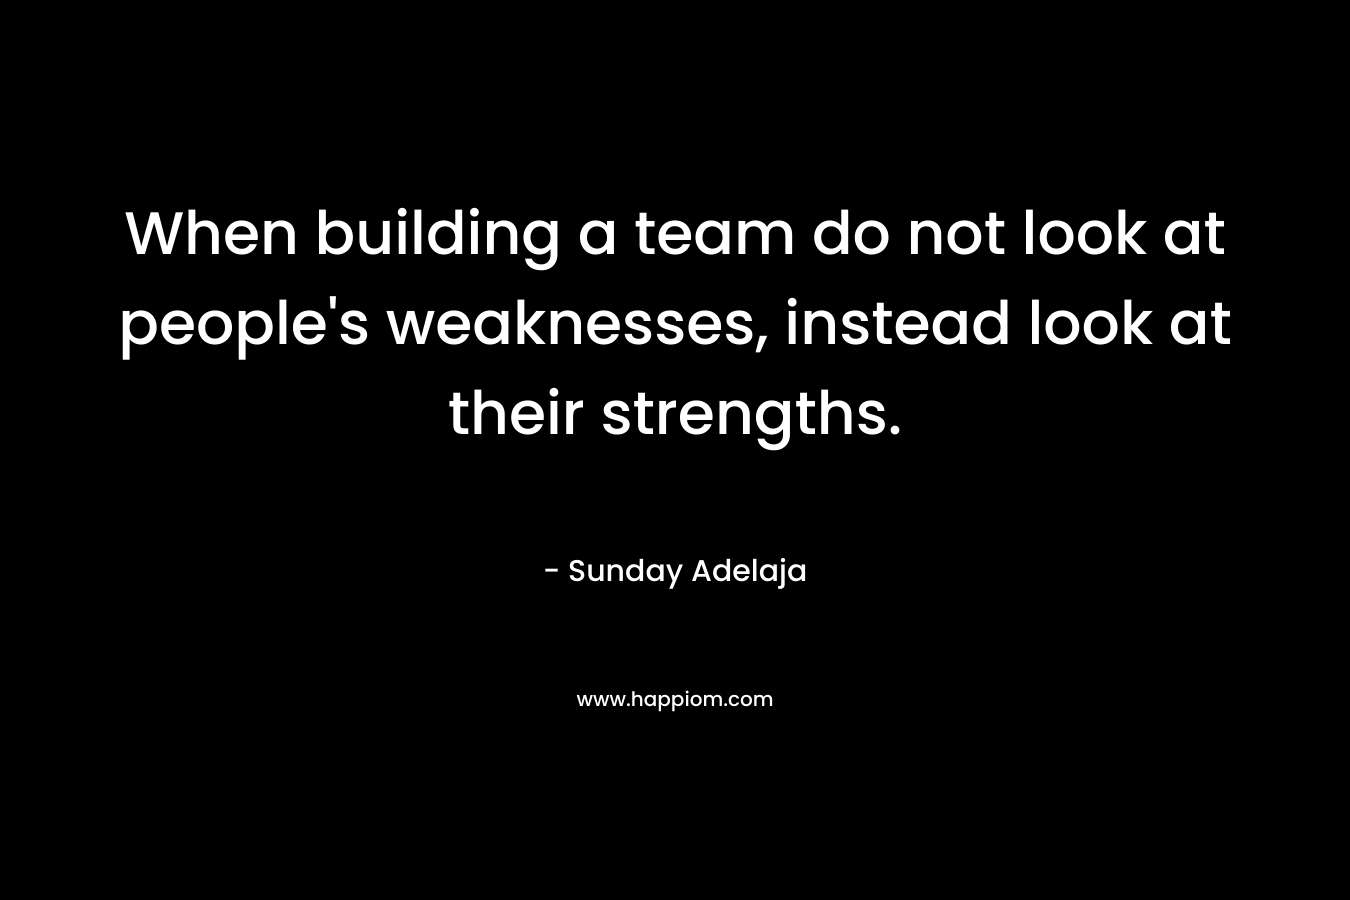 When building a team do not look at people's weaknesses, instead look at their strengths.